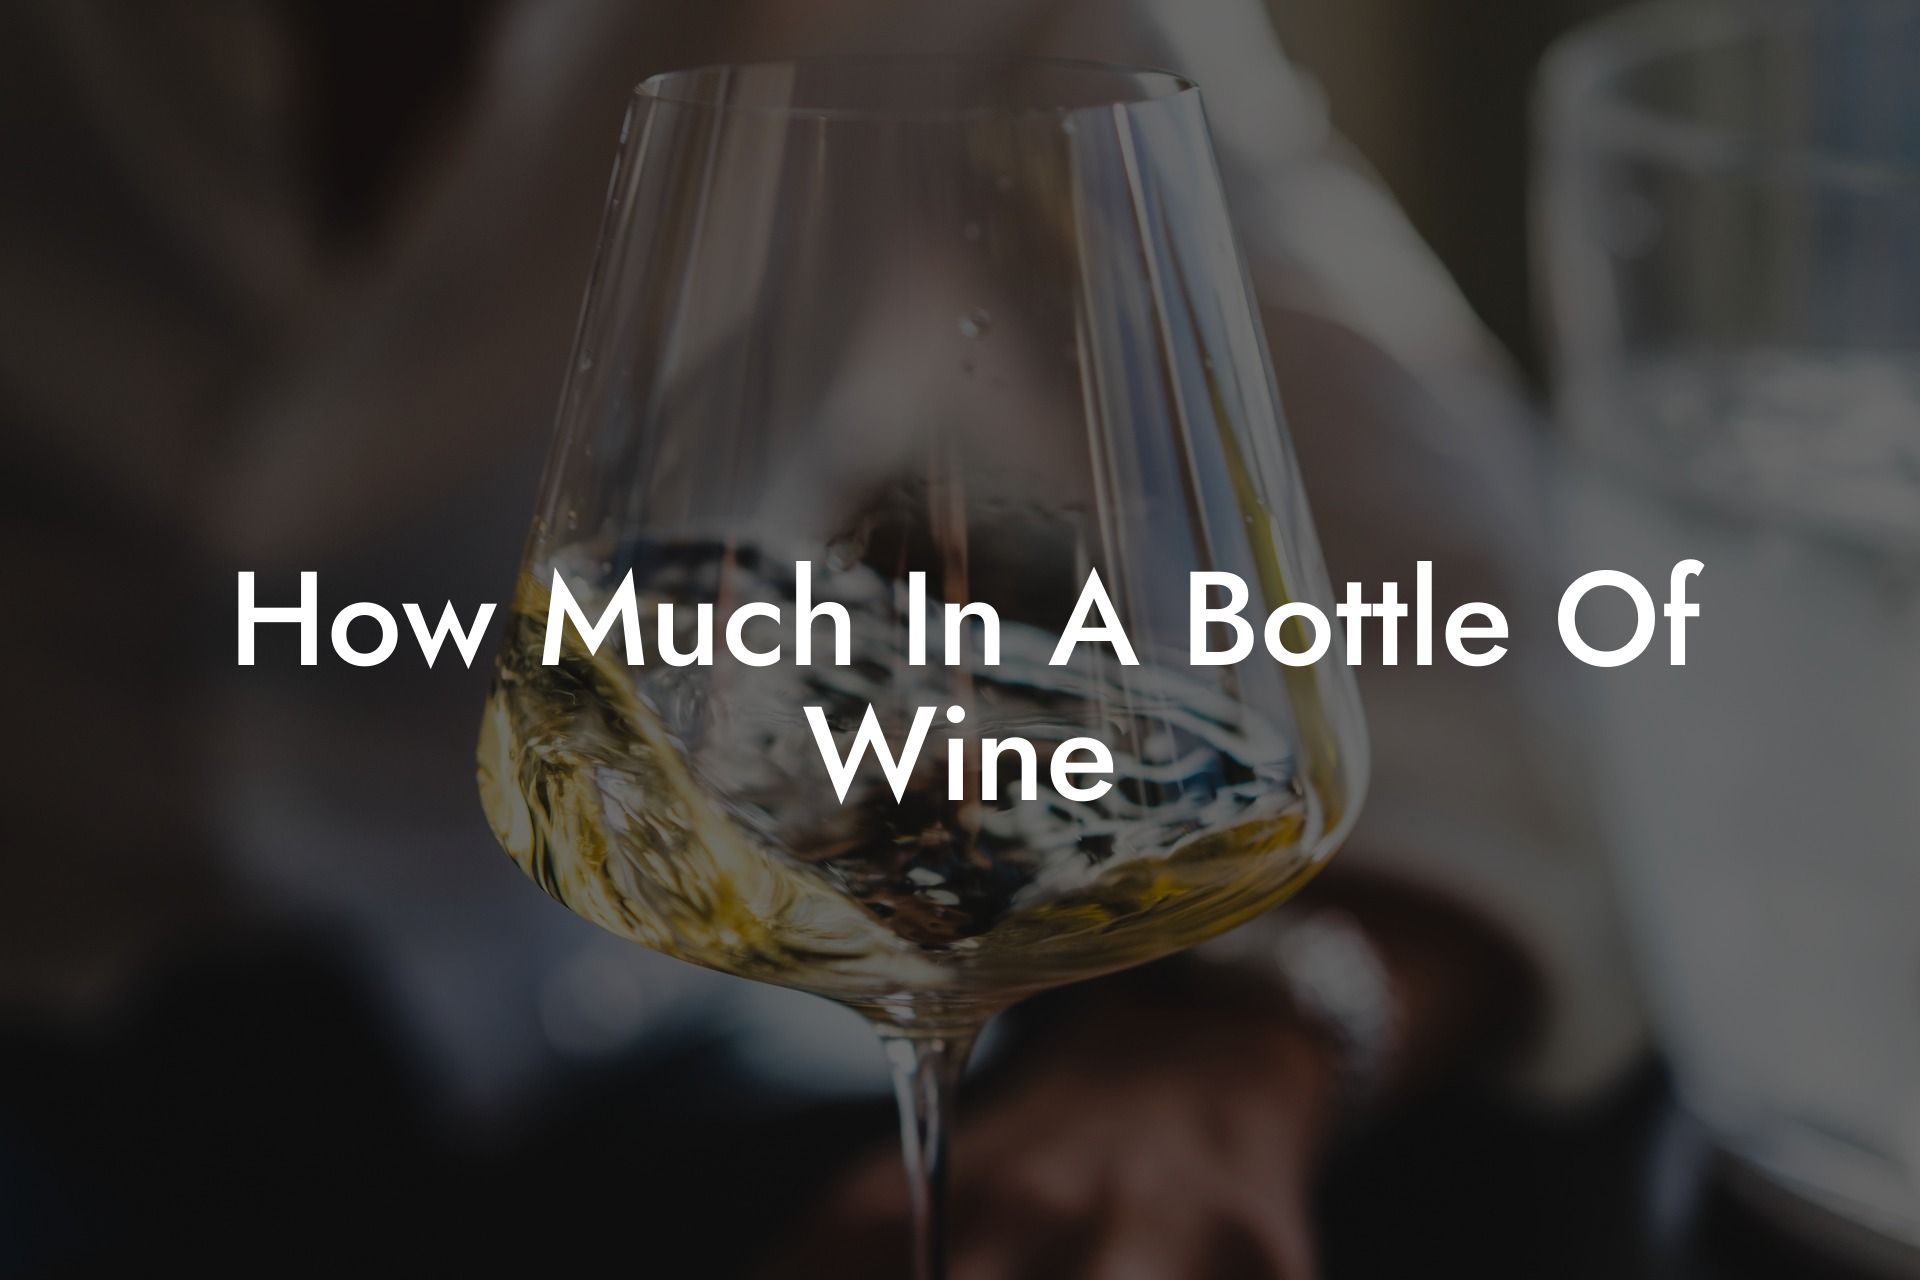 How Much In A Bottle Of Wine